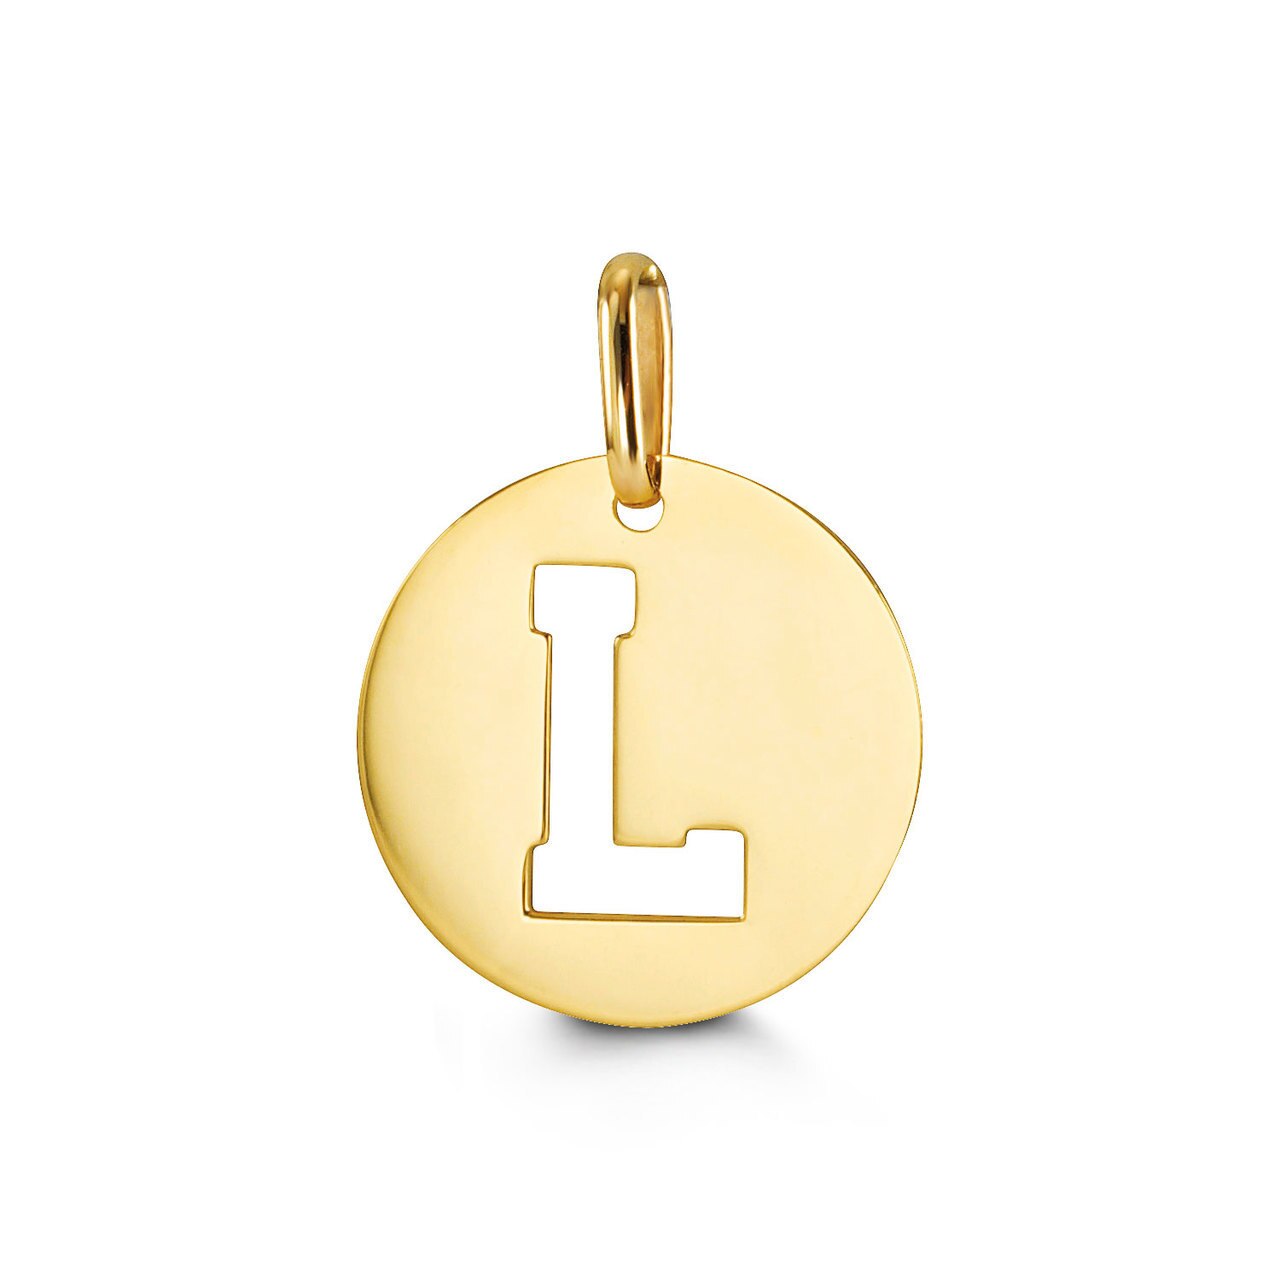 Letter "L" Pendant in Yellow Gold